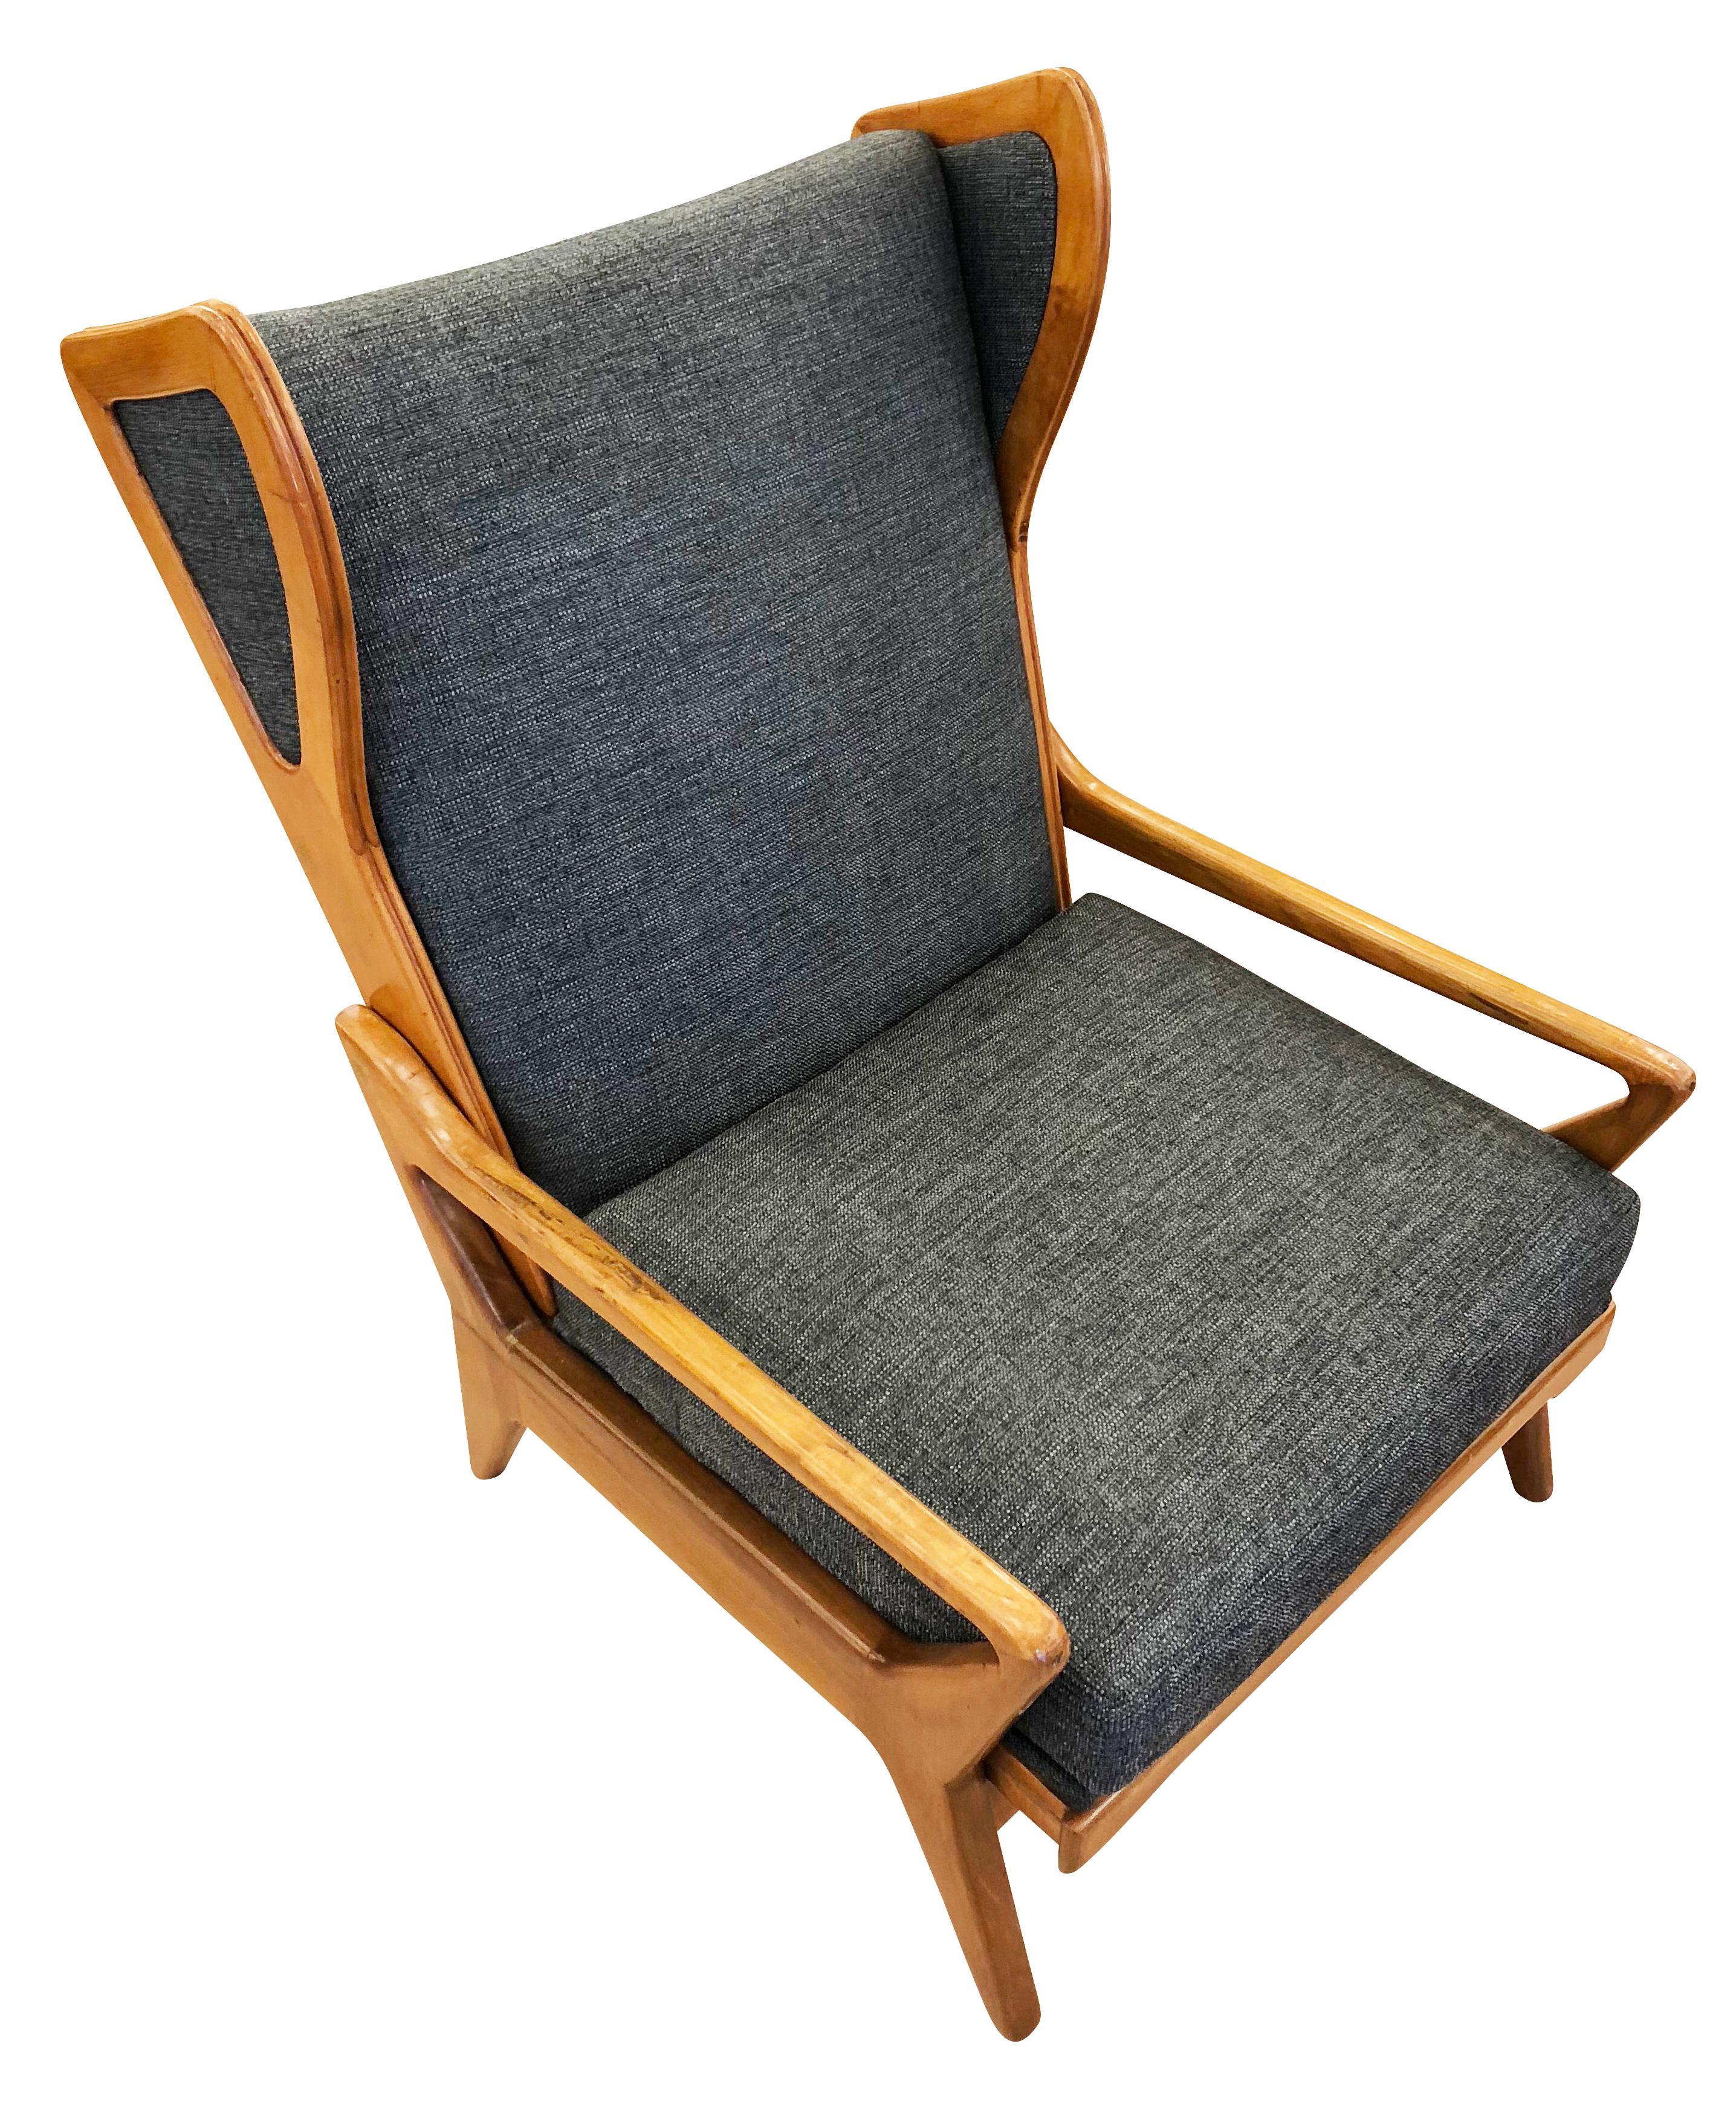 Very large Italian midcentury lounge chair with a light walnut frame and grey cotton upholstery.

Condition: Excellent vintage condition, minor wear consistent with age and use. Newly recovered.

Dimensions: Width: 28.5”

Depth: 35”

Height: